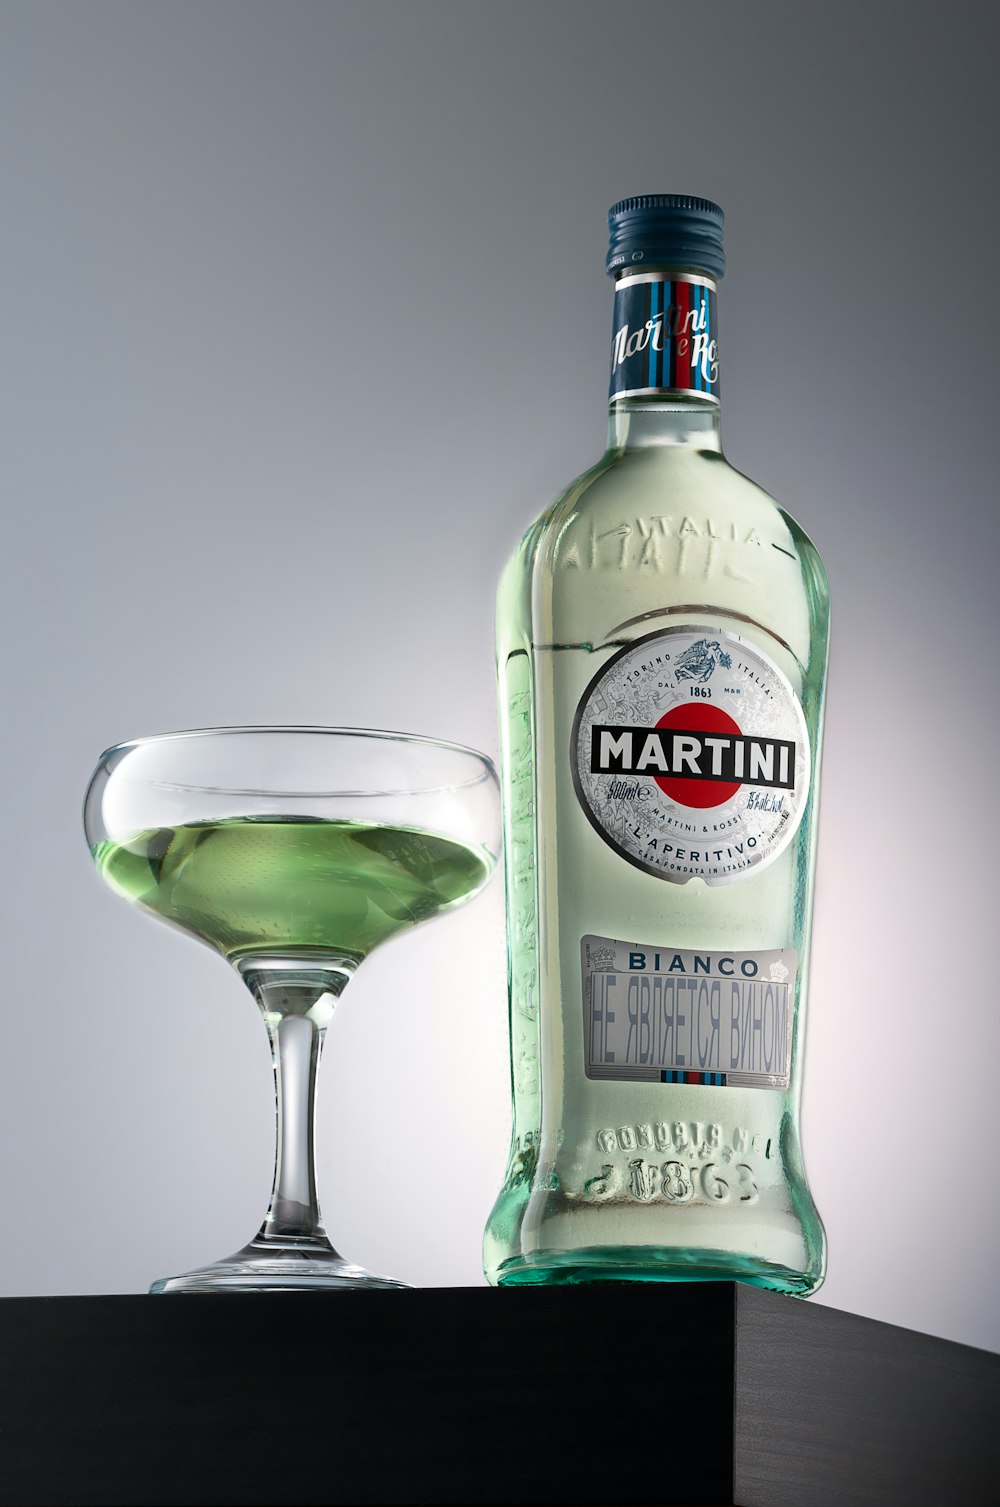 a bottle of alcohol next to a glass of green liquid